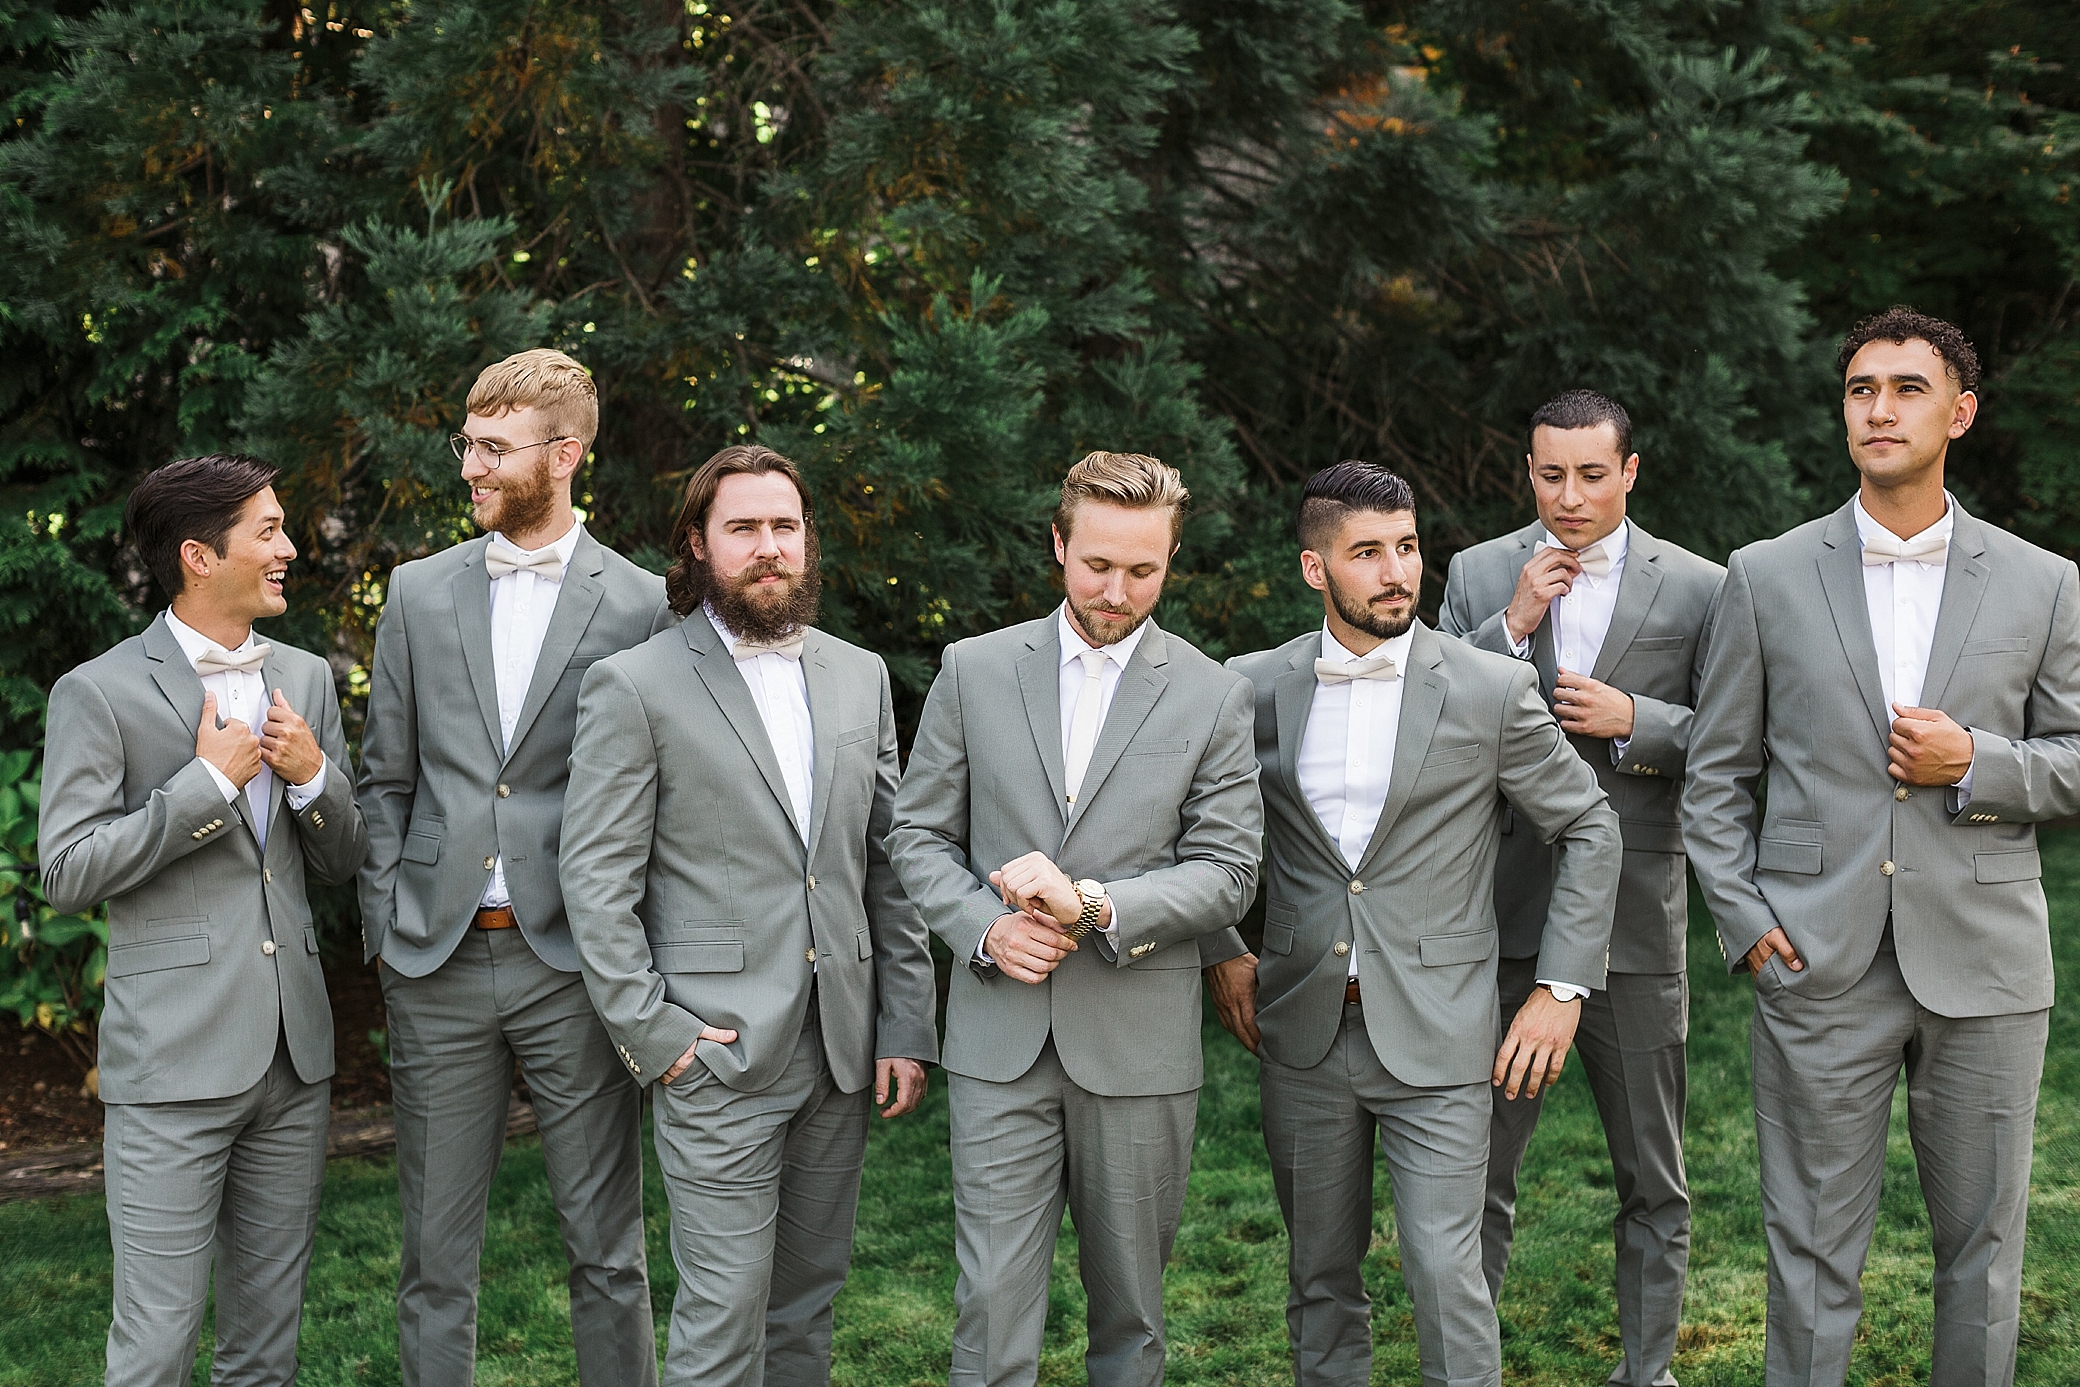 Bridal party photographed by Seattle Intimate Wedding Photographer, Megan Montalvo Photography